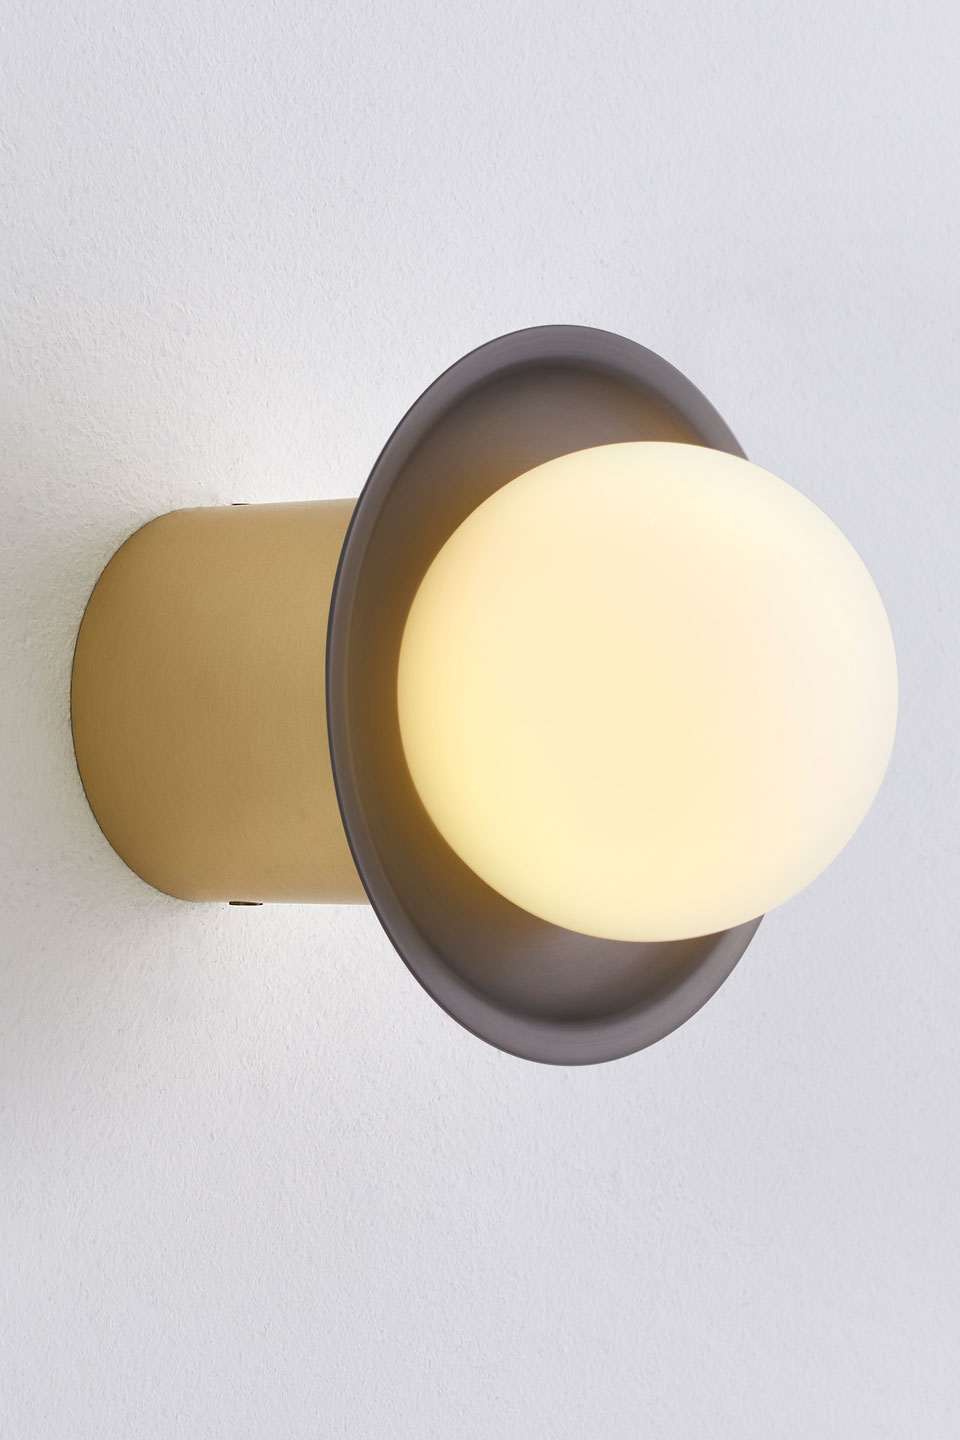 Janed small wall light black and gold. CVL Luminaires. 